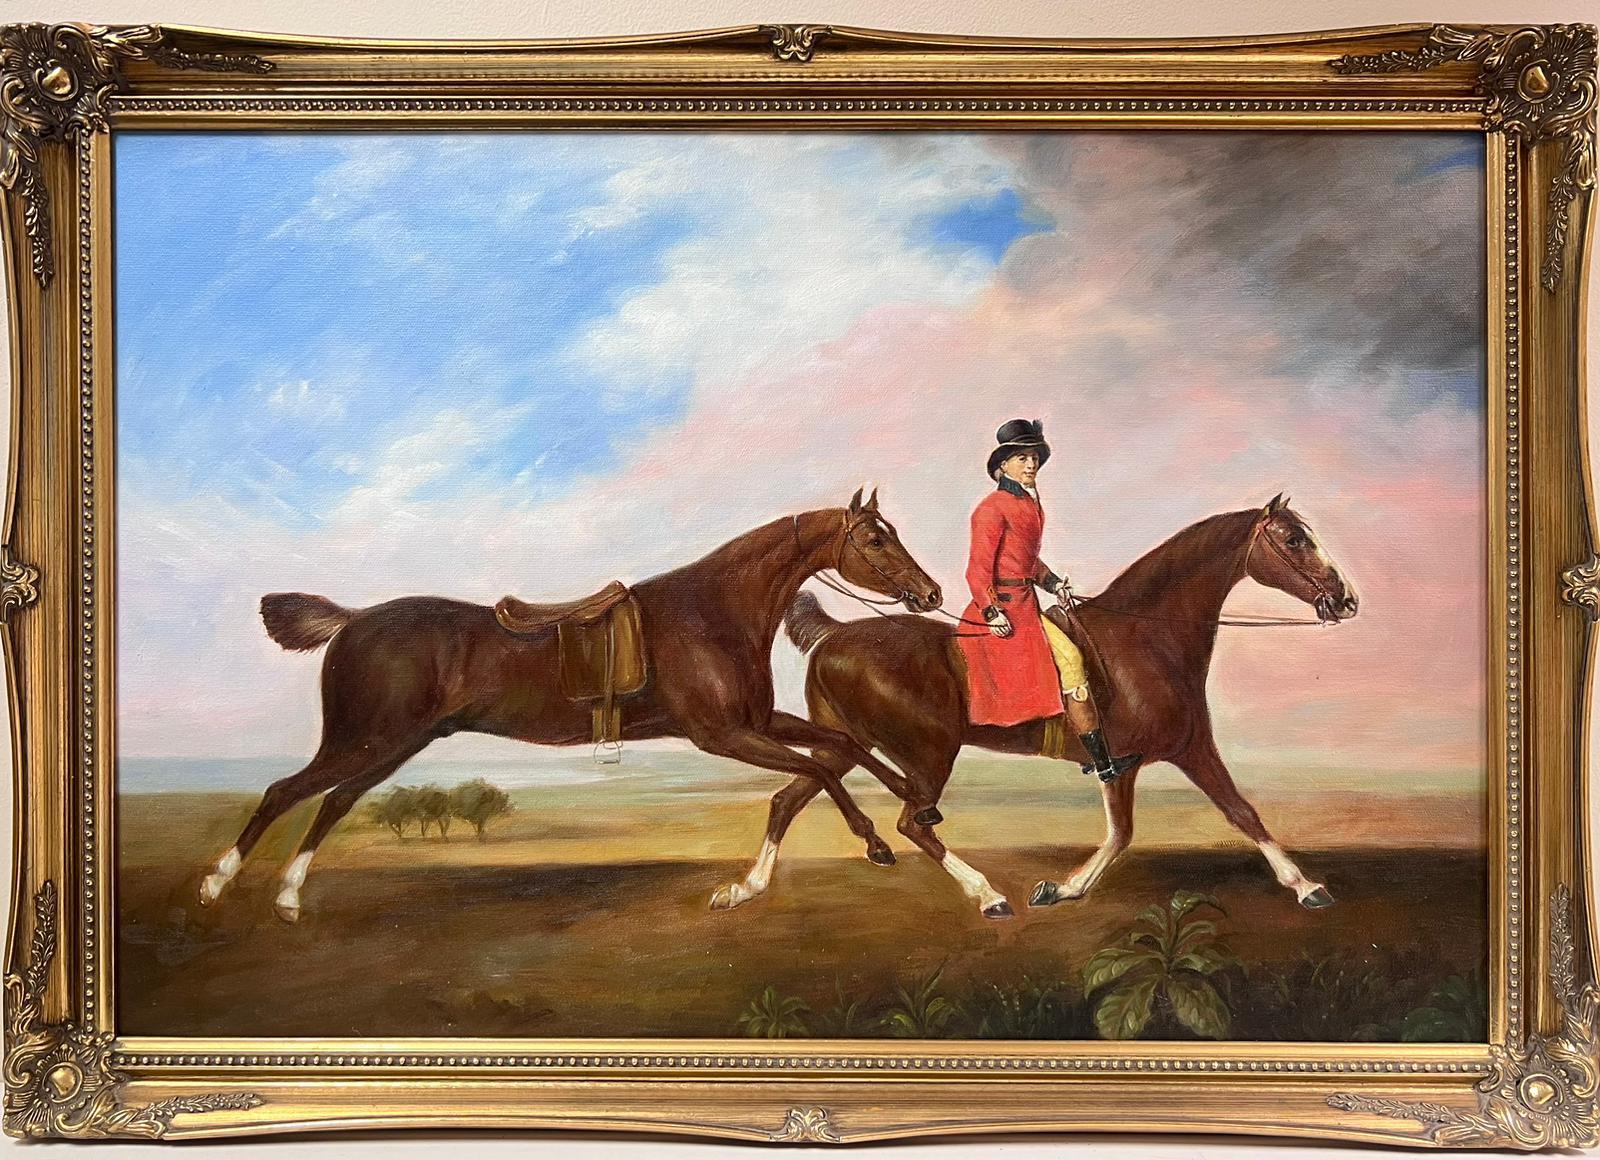 The Horse and Rider
European School, late 20th century
(painted after an earlier image)
oil on canvas, framed
framed: 23 x 33 inches
canvas : 20 x 30 inches
provenance: private collection, UK
condition: very good and sound condition 